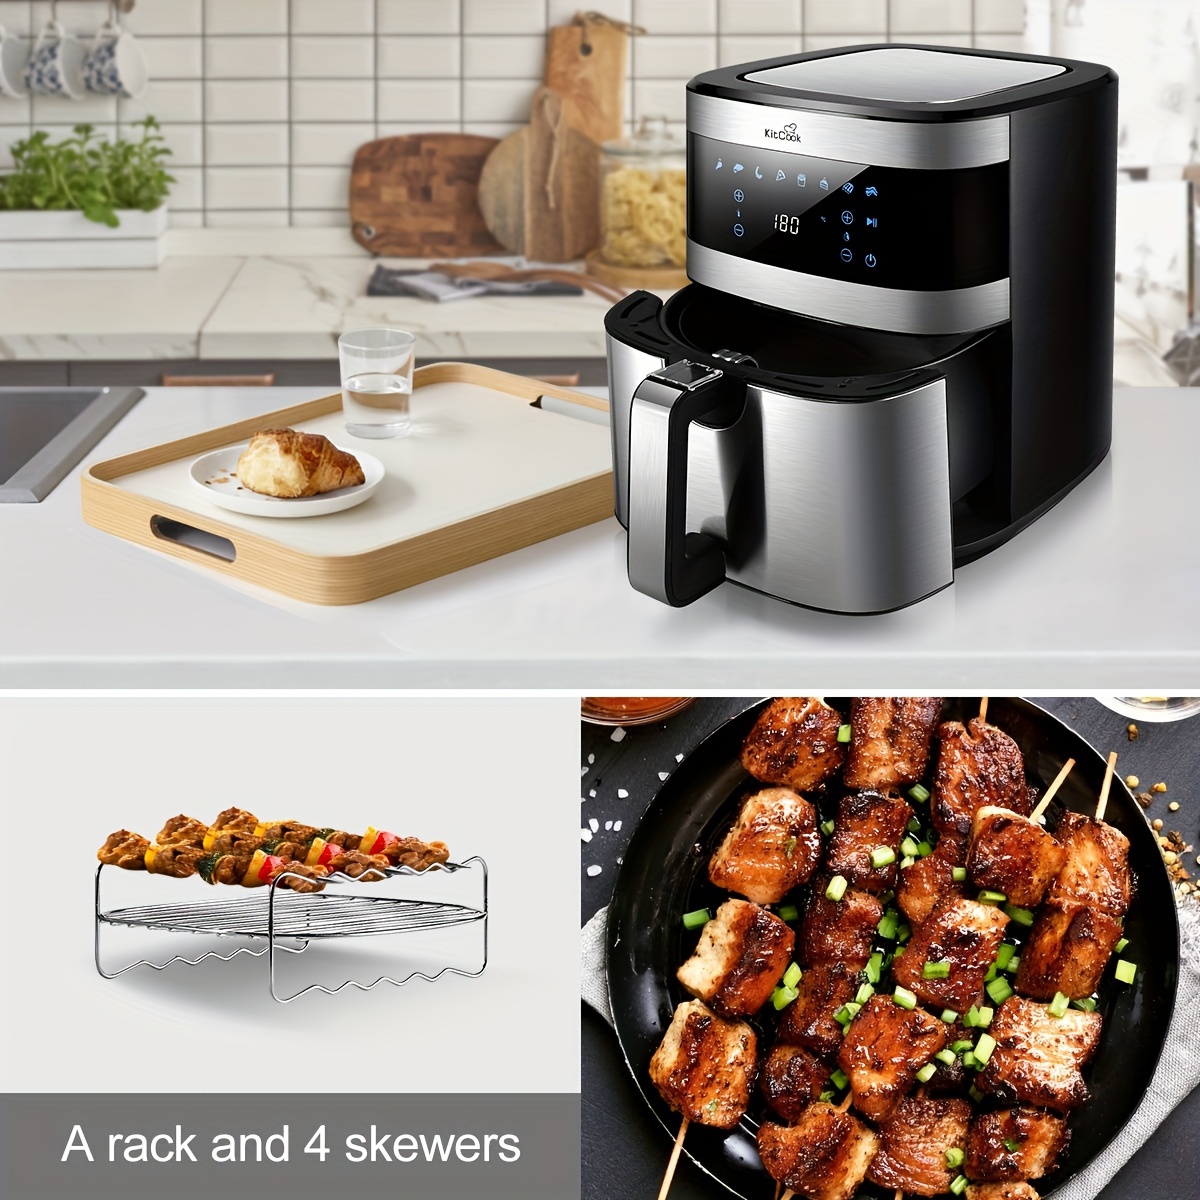  LEDOSAKO Air Fryer-1700W 10 Quart Large Family-sized Air-fryer  Oven with Non-stick Basket, 100 Recipes, Digital LED Display Touchscreen  and One-touch 10 Preset Cooking Functions for Grilling, Toasting, Roasting,  etc. : Home